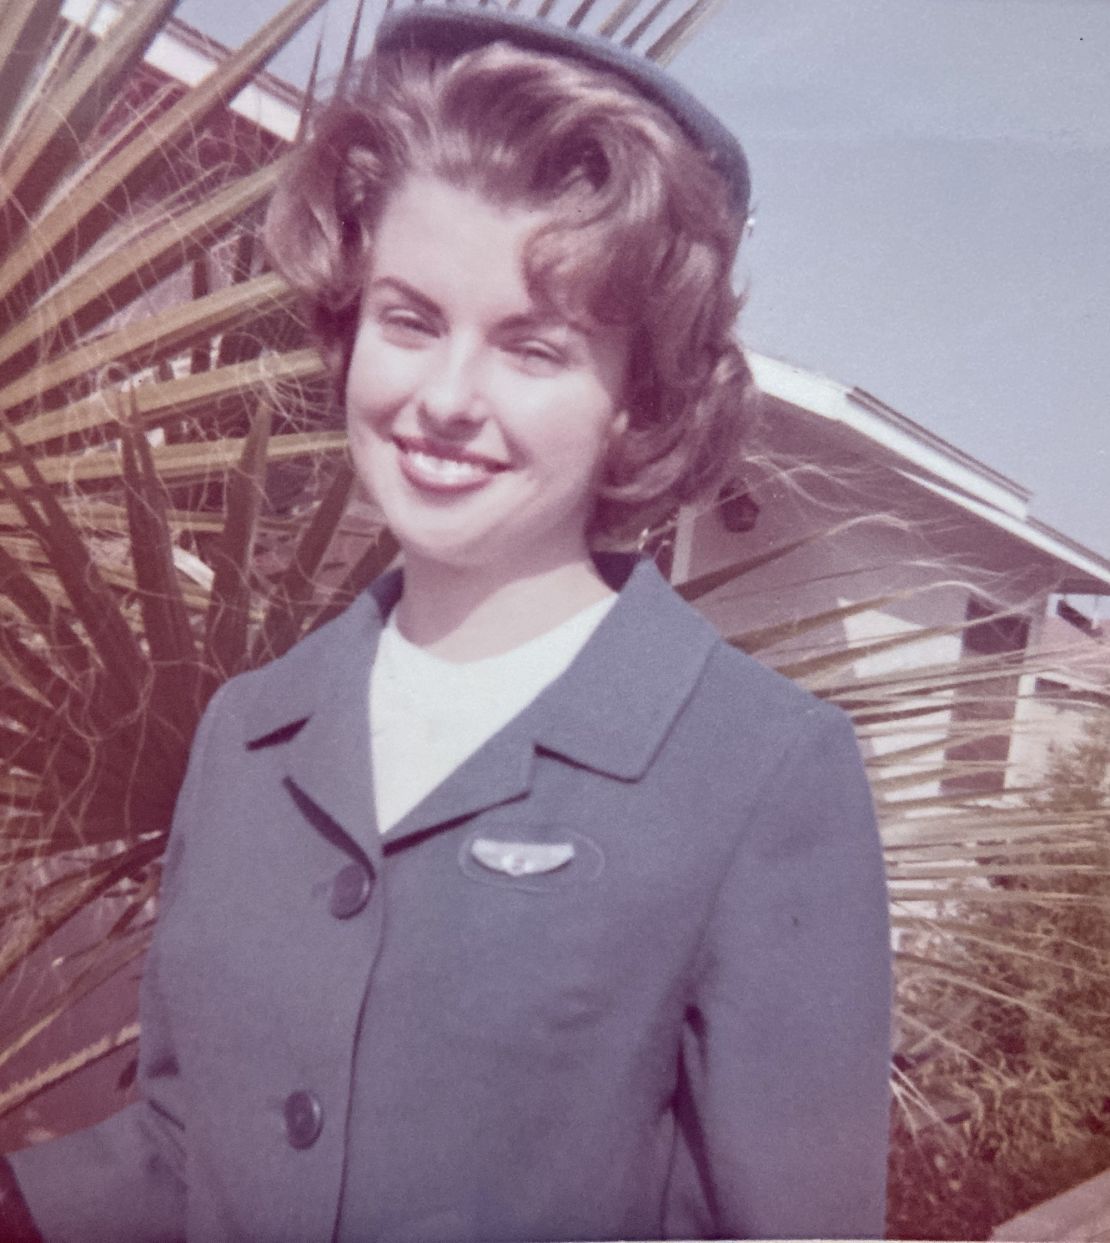 In 1964, Jerilyn Young was a flight attendant for United Airlines.